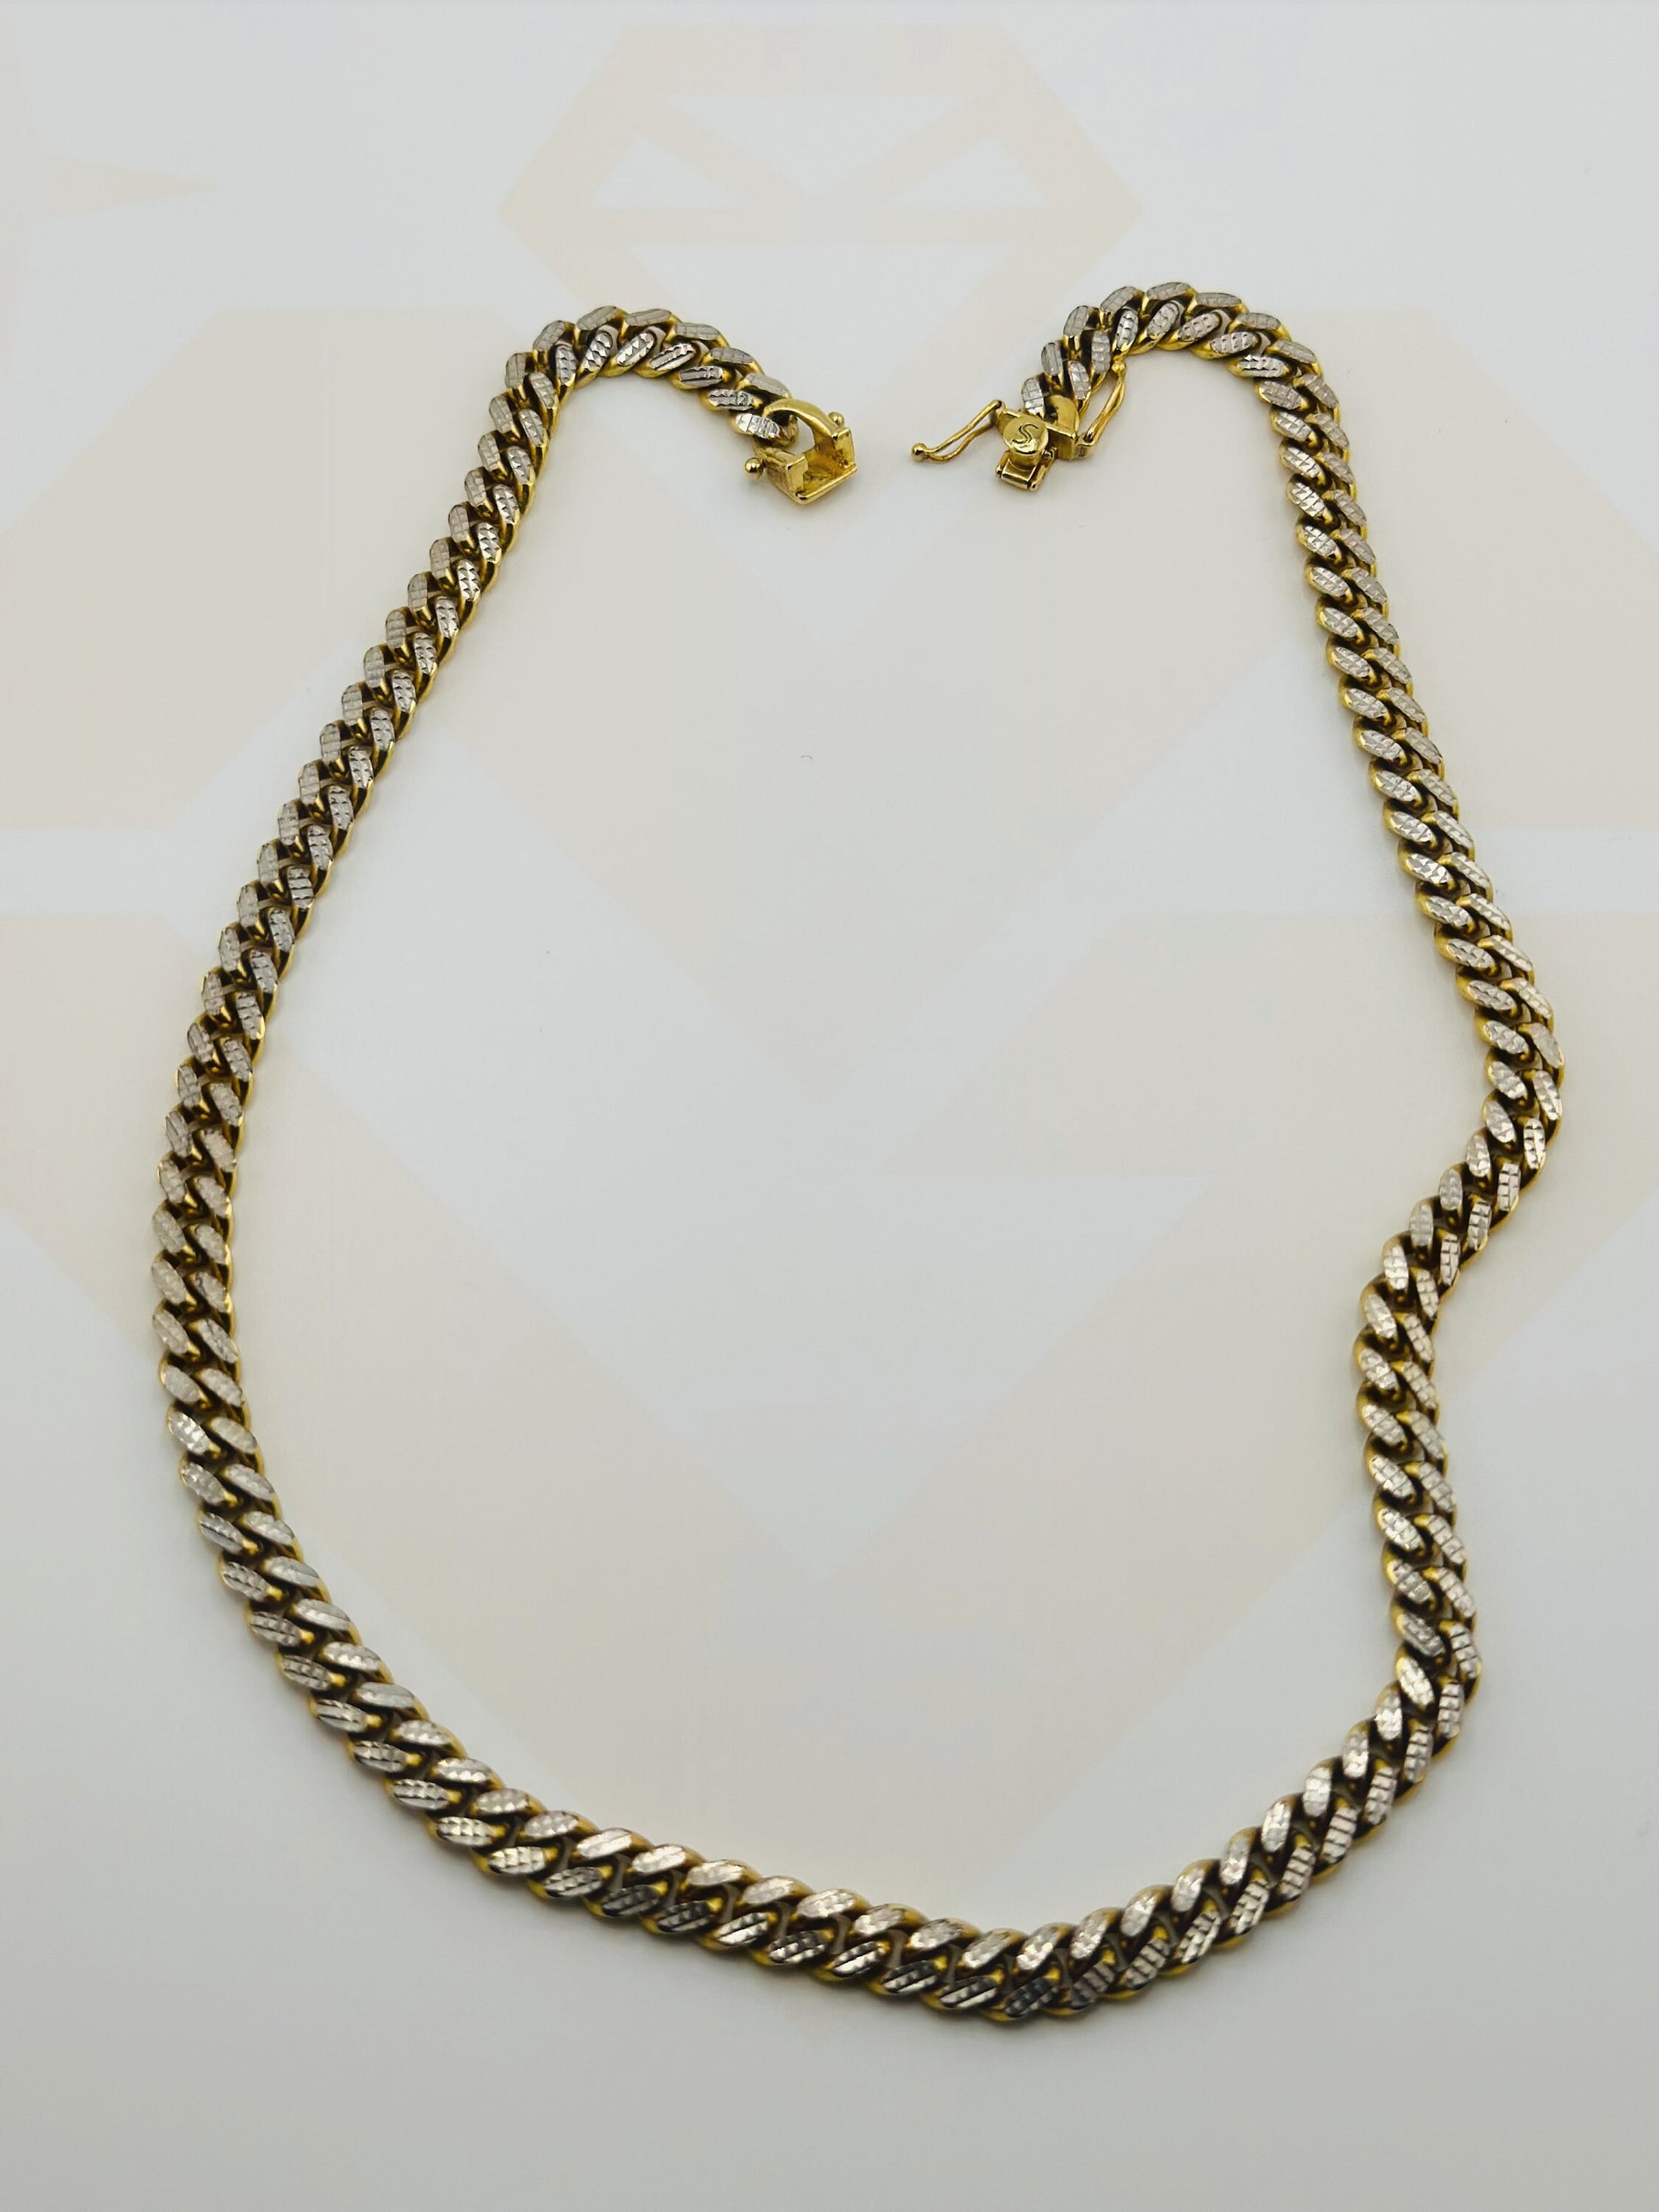 10k Heavy Gold Vermeil Diamond cut unique Custom cuban link chain, Genuine Solid 925 Metal Mens Necklace Popular Hiphop Jewelry Gift for him